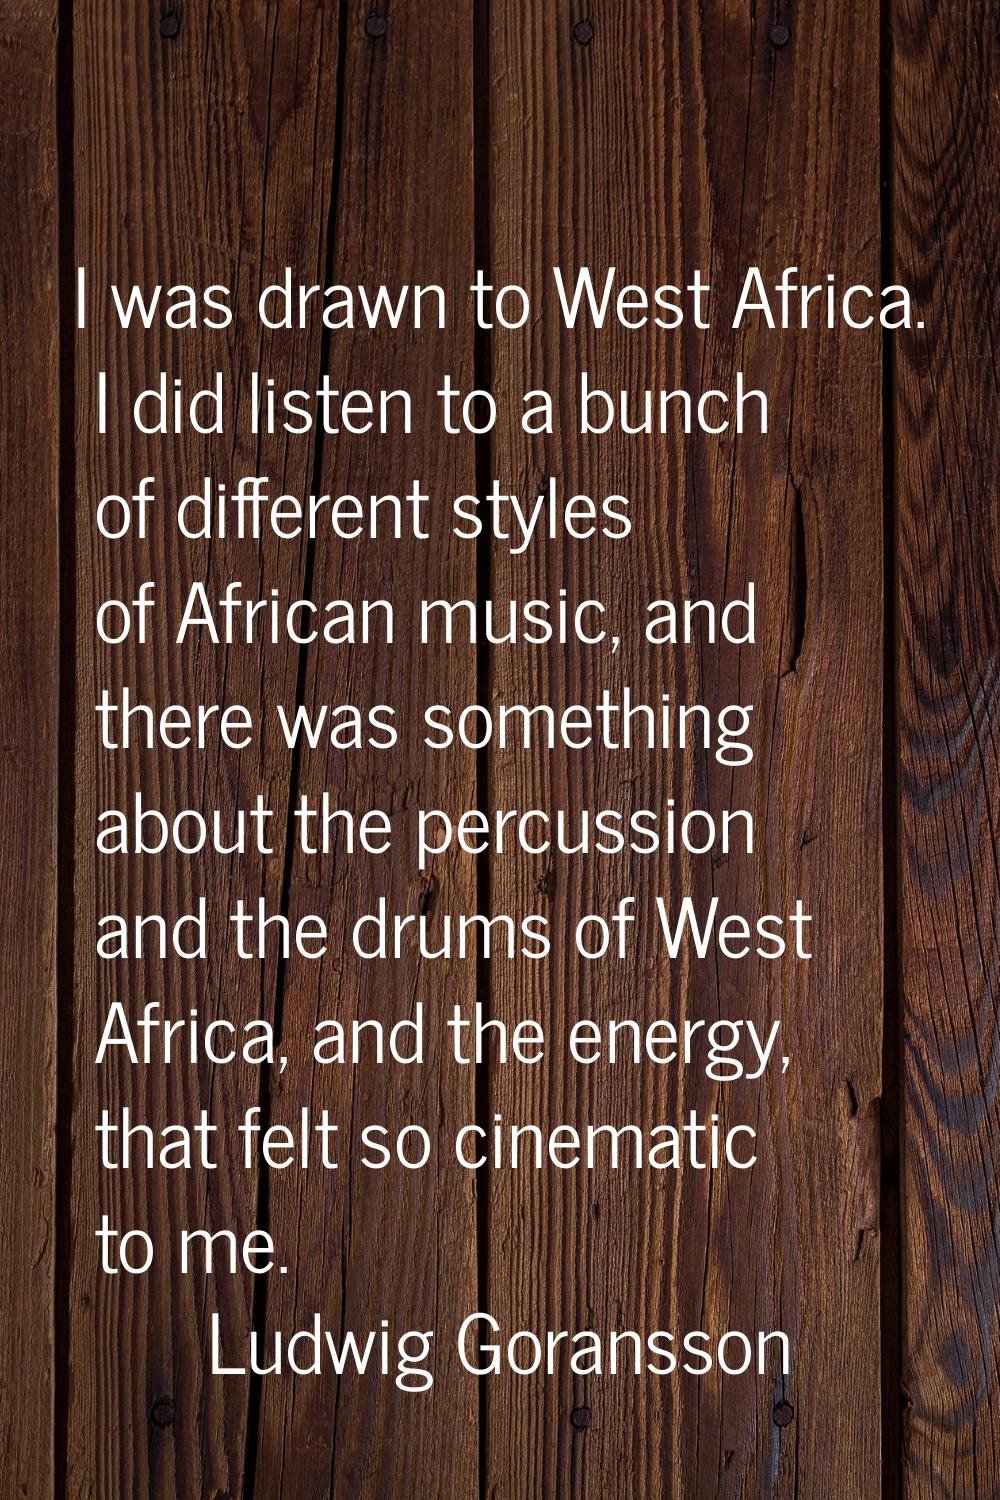 I was drawn to West Africa. I did listen to a bunch of different styles of African music, and there